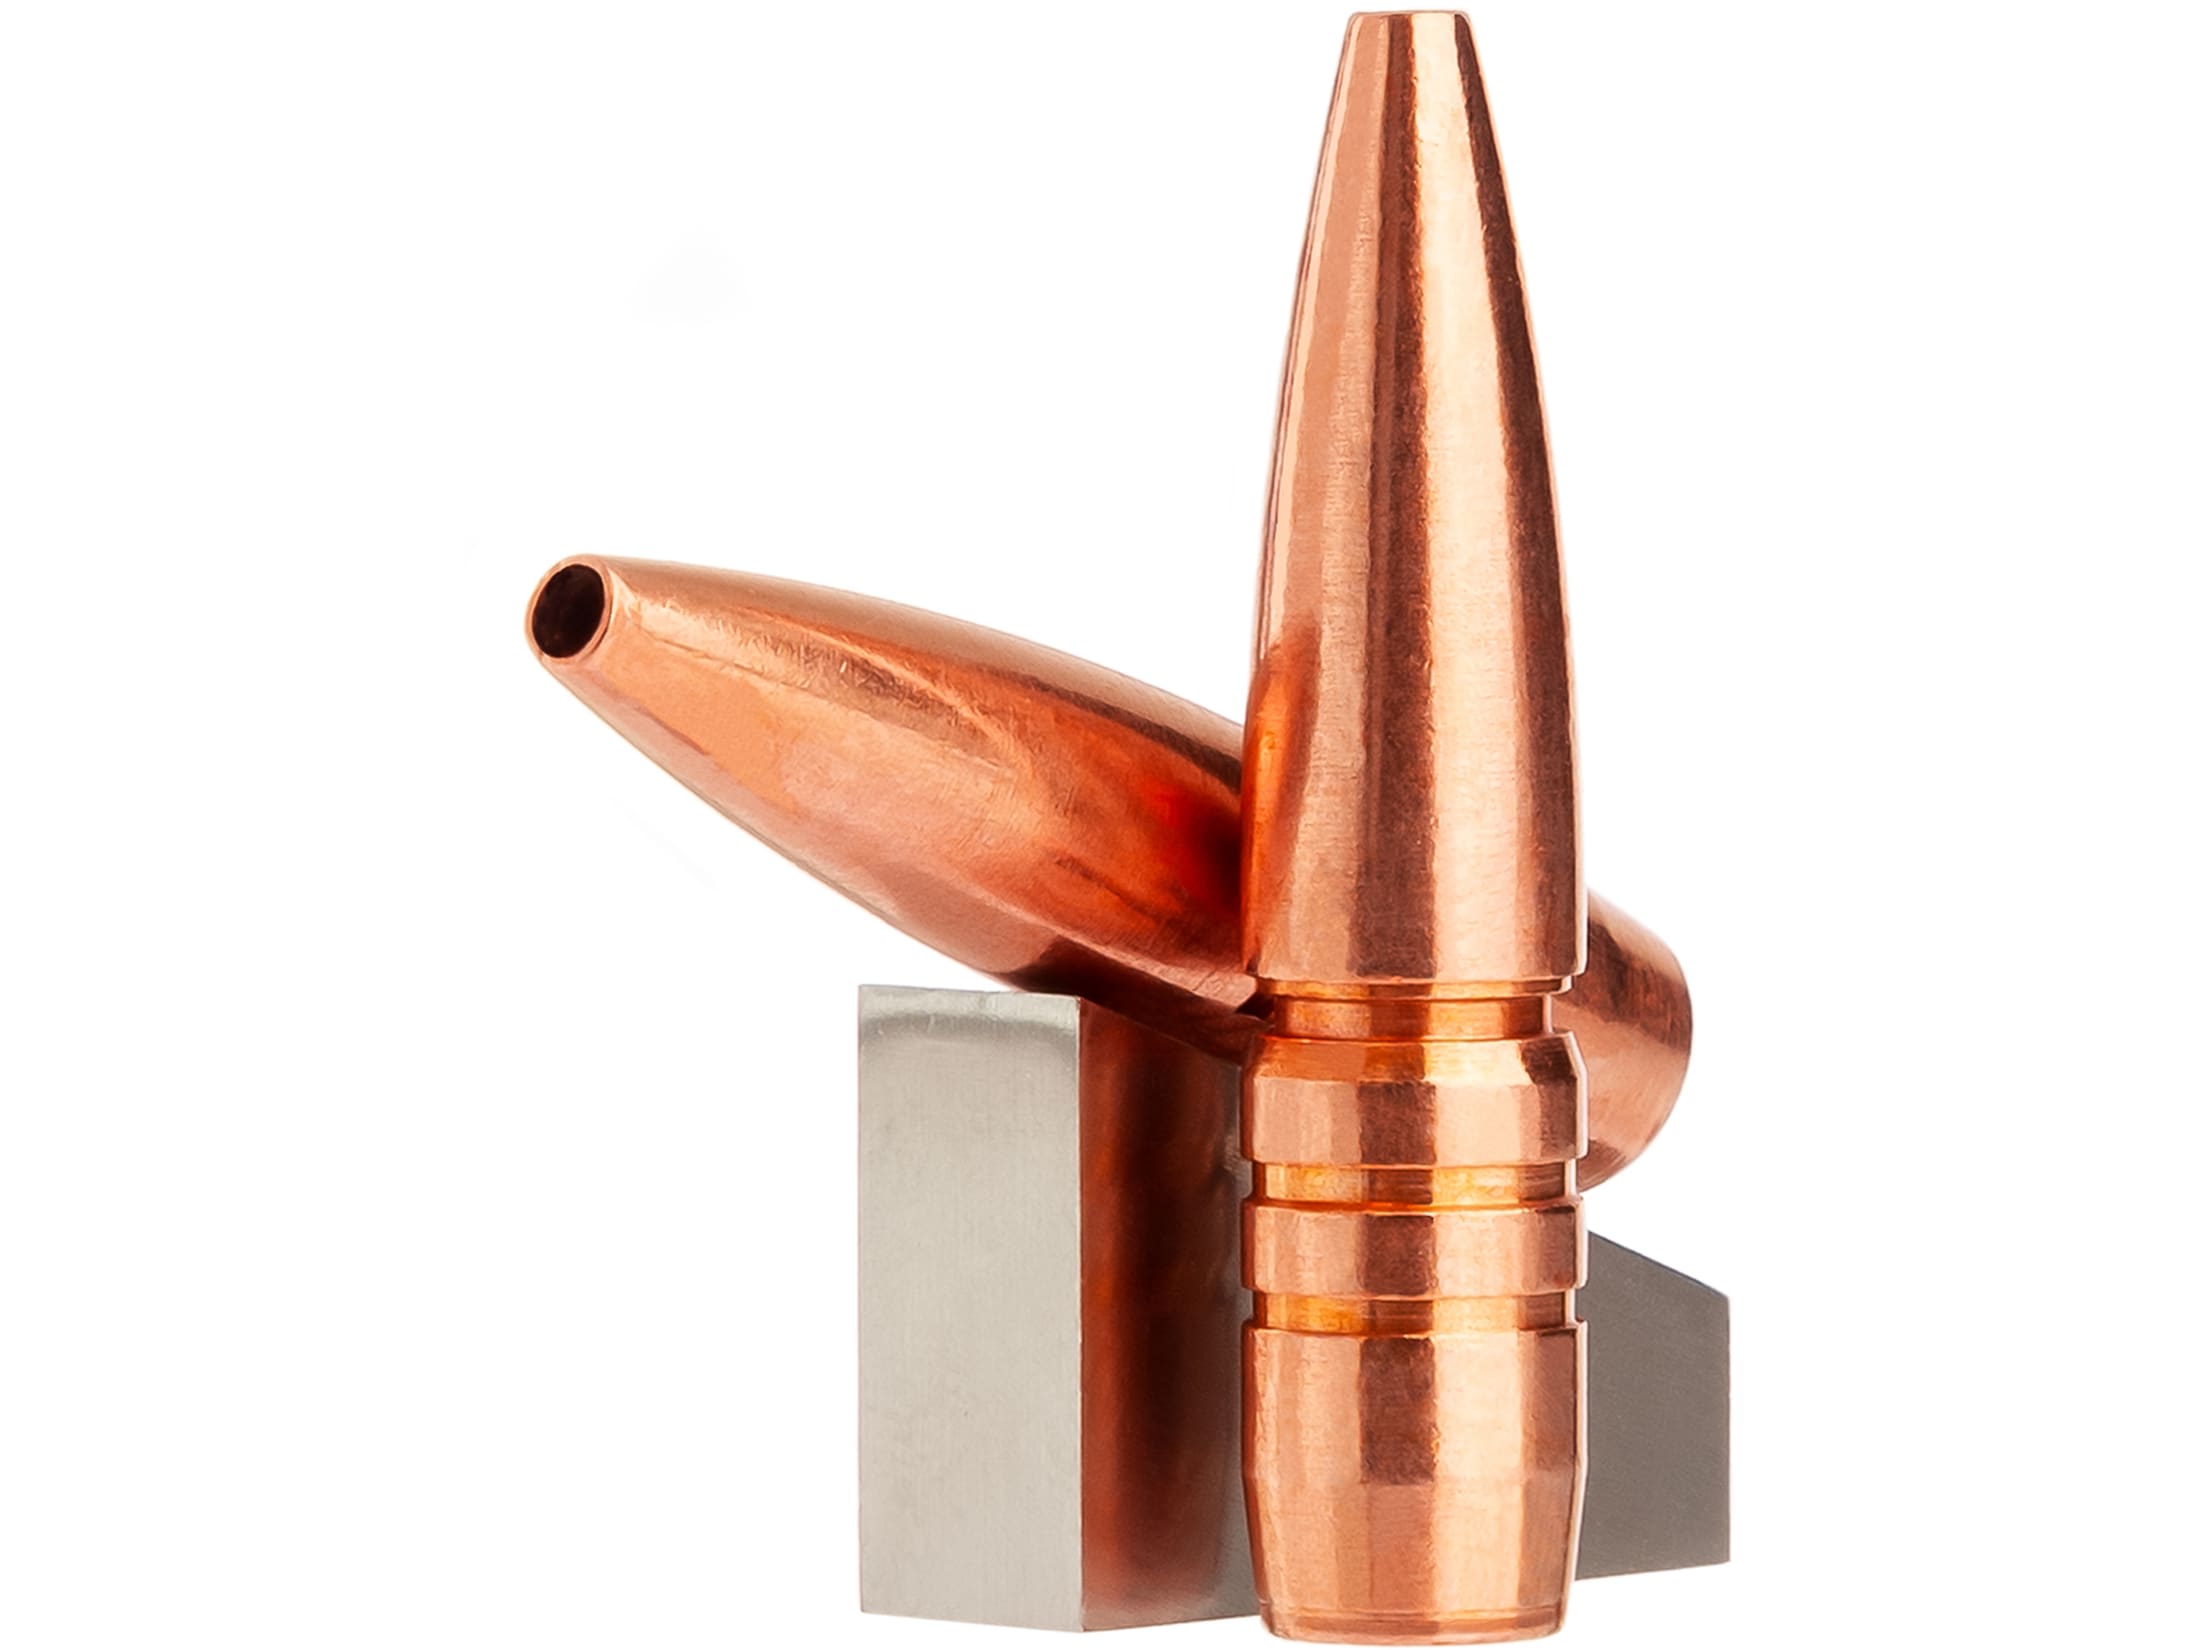 Lehigh Defense Controlled Chaos Bullets 6.5 Grendel (264 Diameter) 110 Grain Fracturing Copper Hollow Point Boat Tail Lead-Free